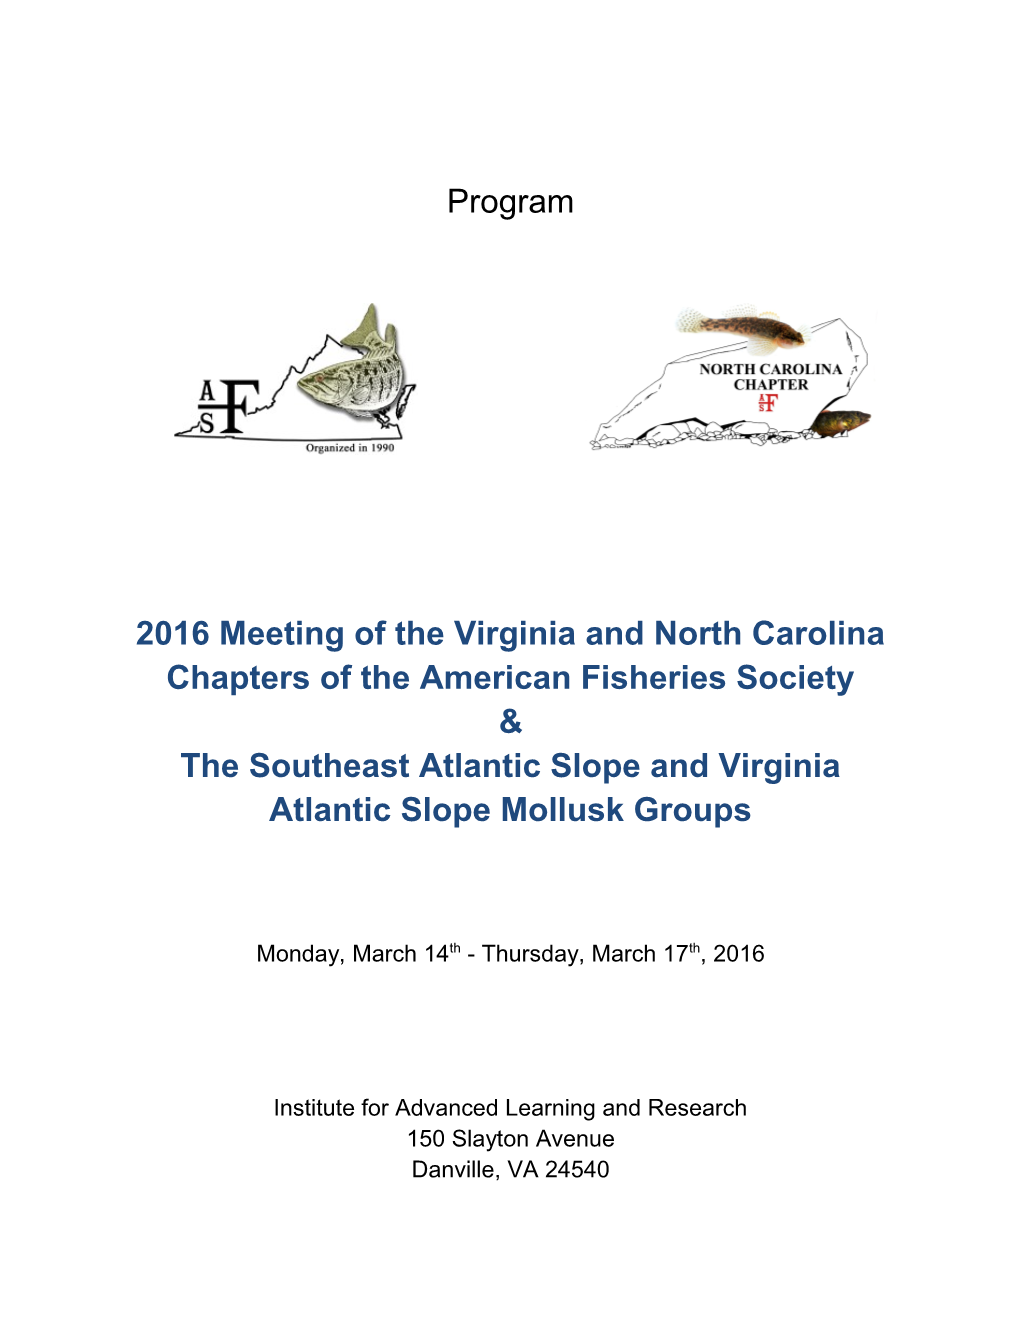 2016Meeting of the Virginia and North Carolina Chapters of the American Fisheries Society